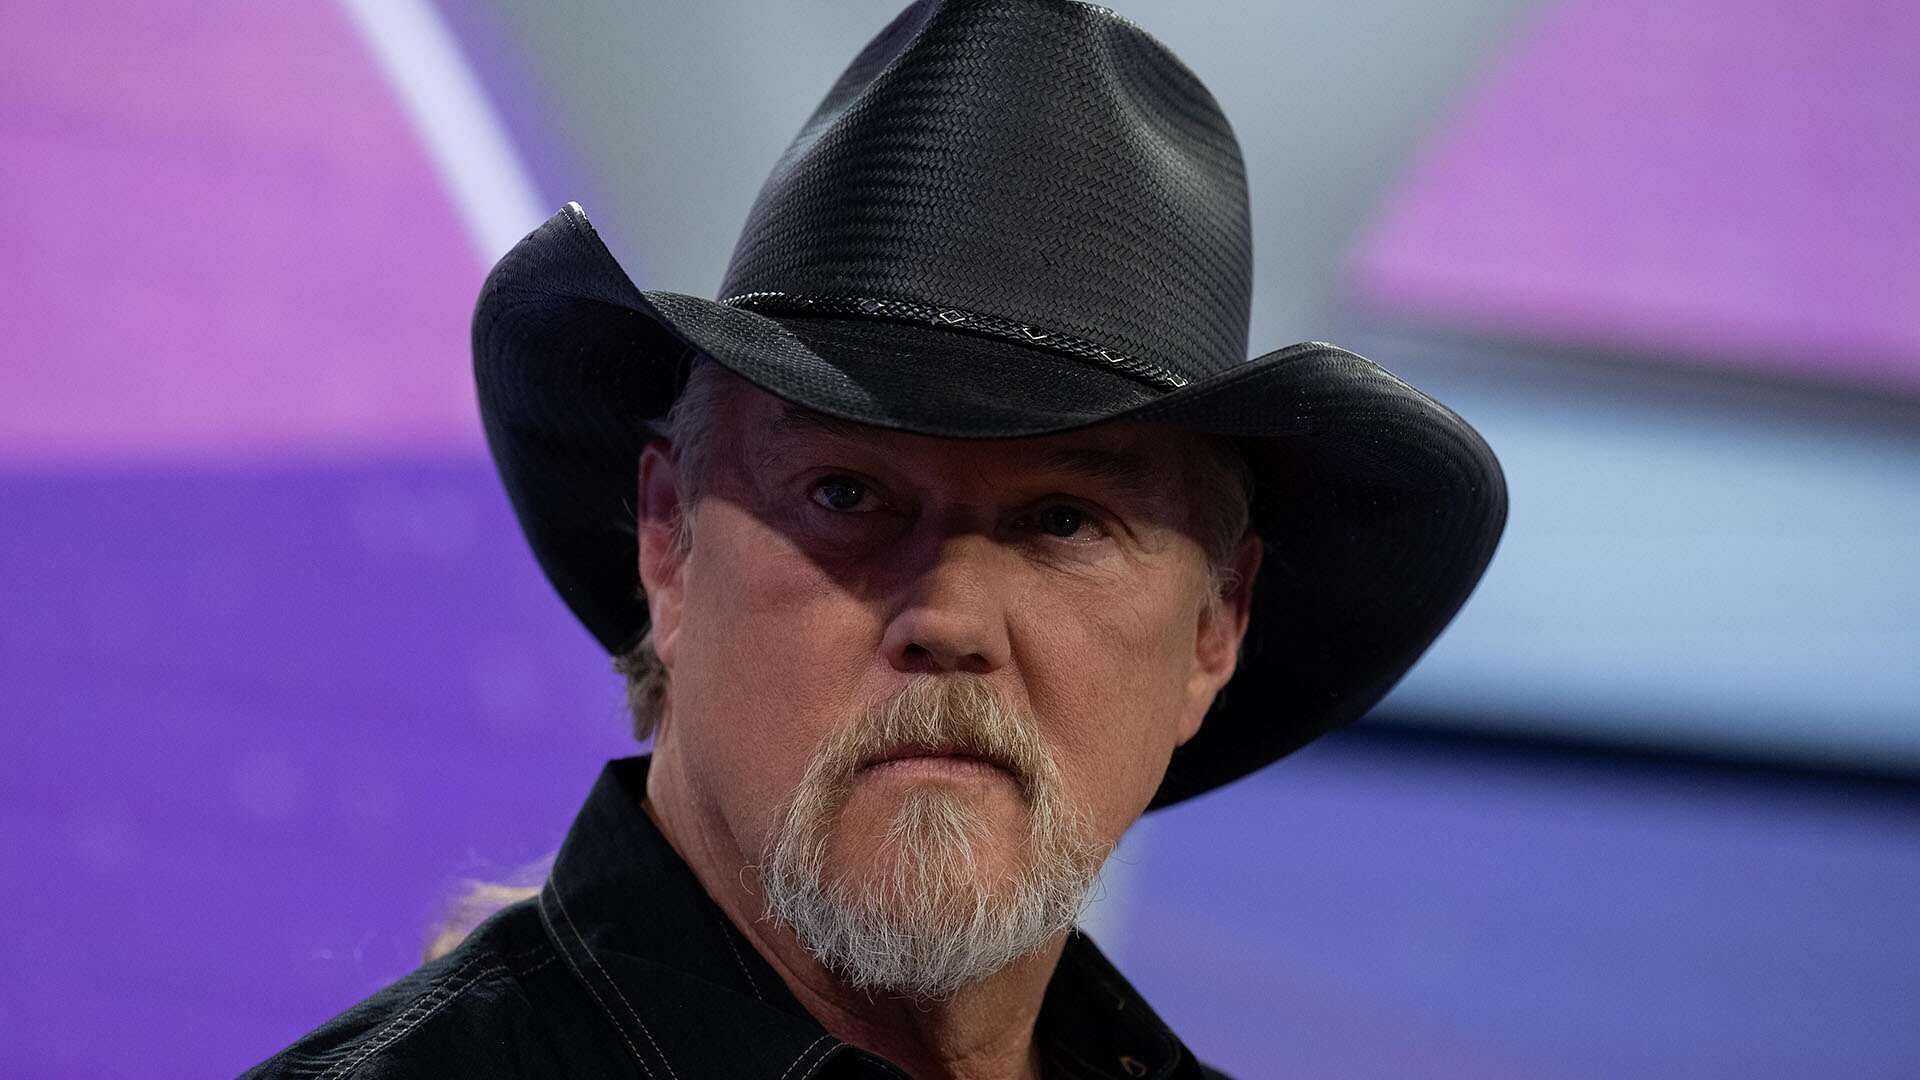 Country music star Trace Adkins